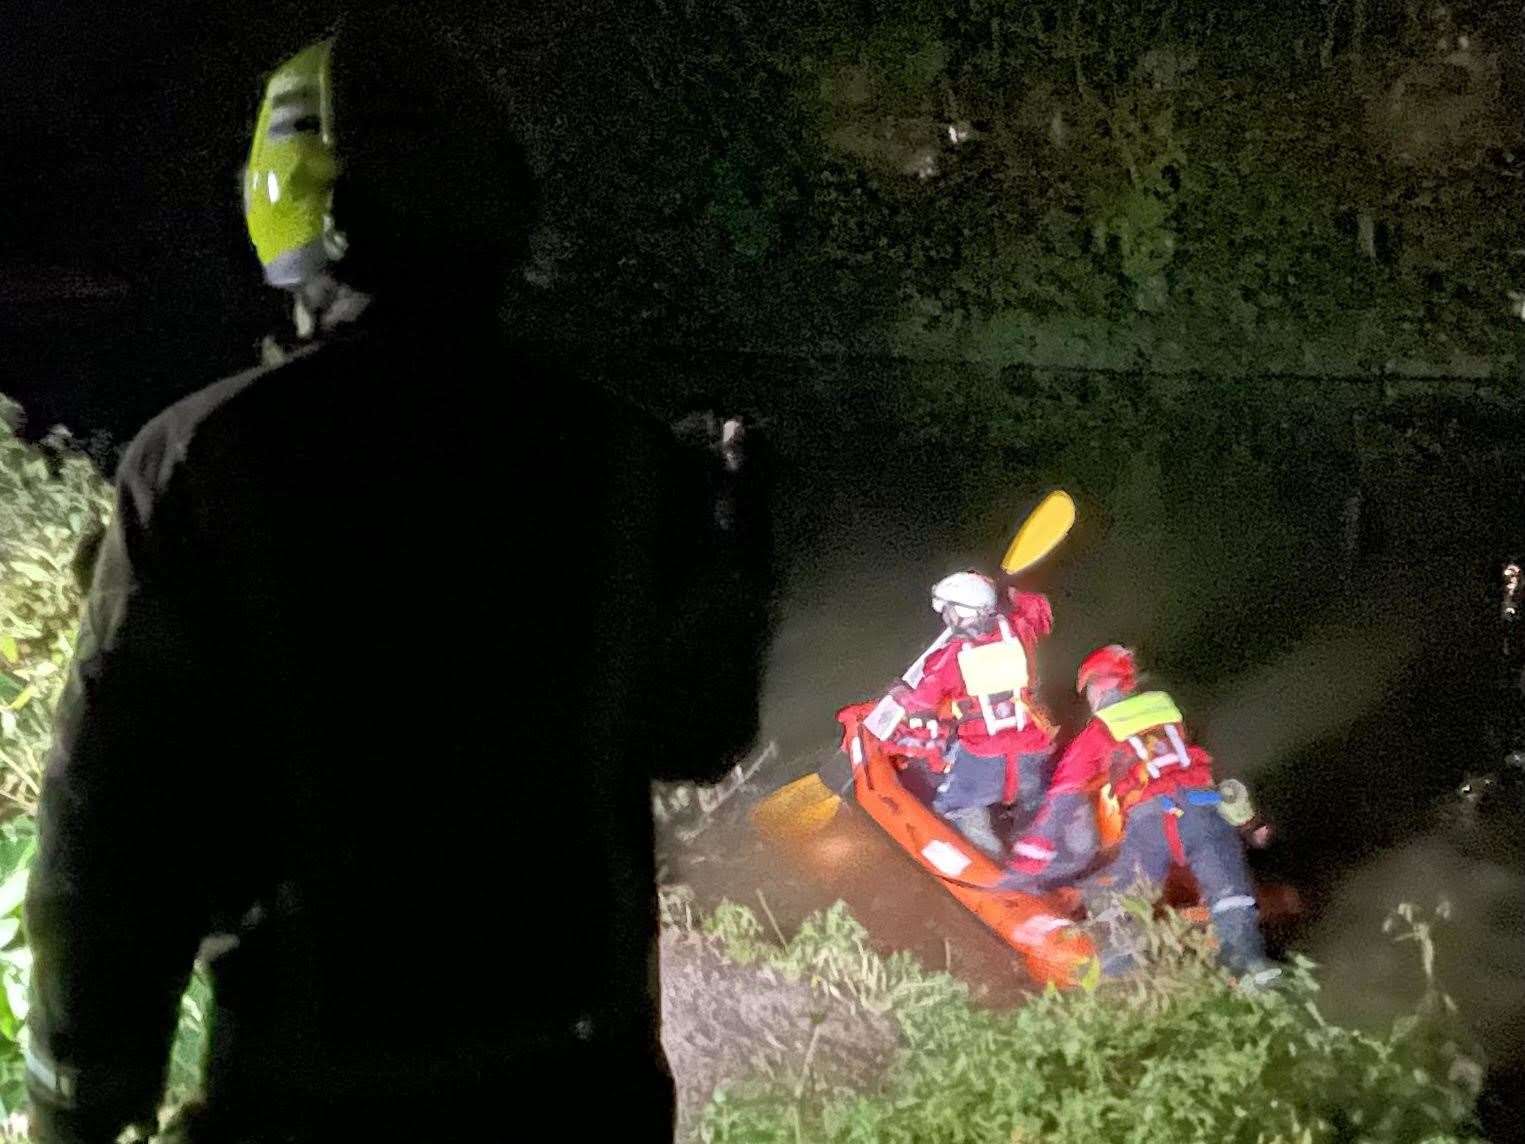 Firefighters enter the water to rescue a man from the River Medway in Maidstone. Picture: Ian Chadwick